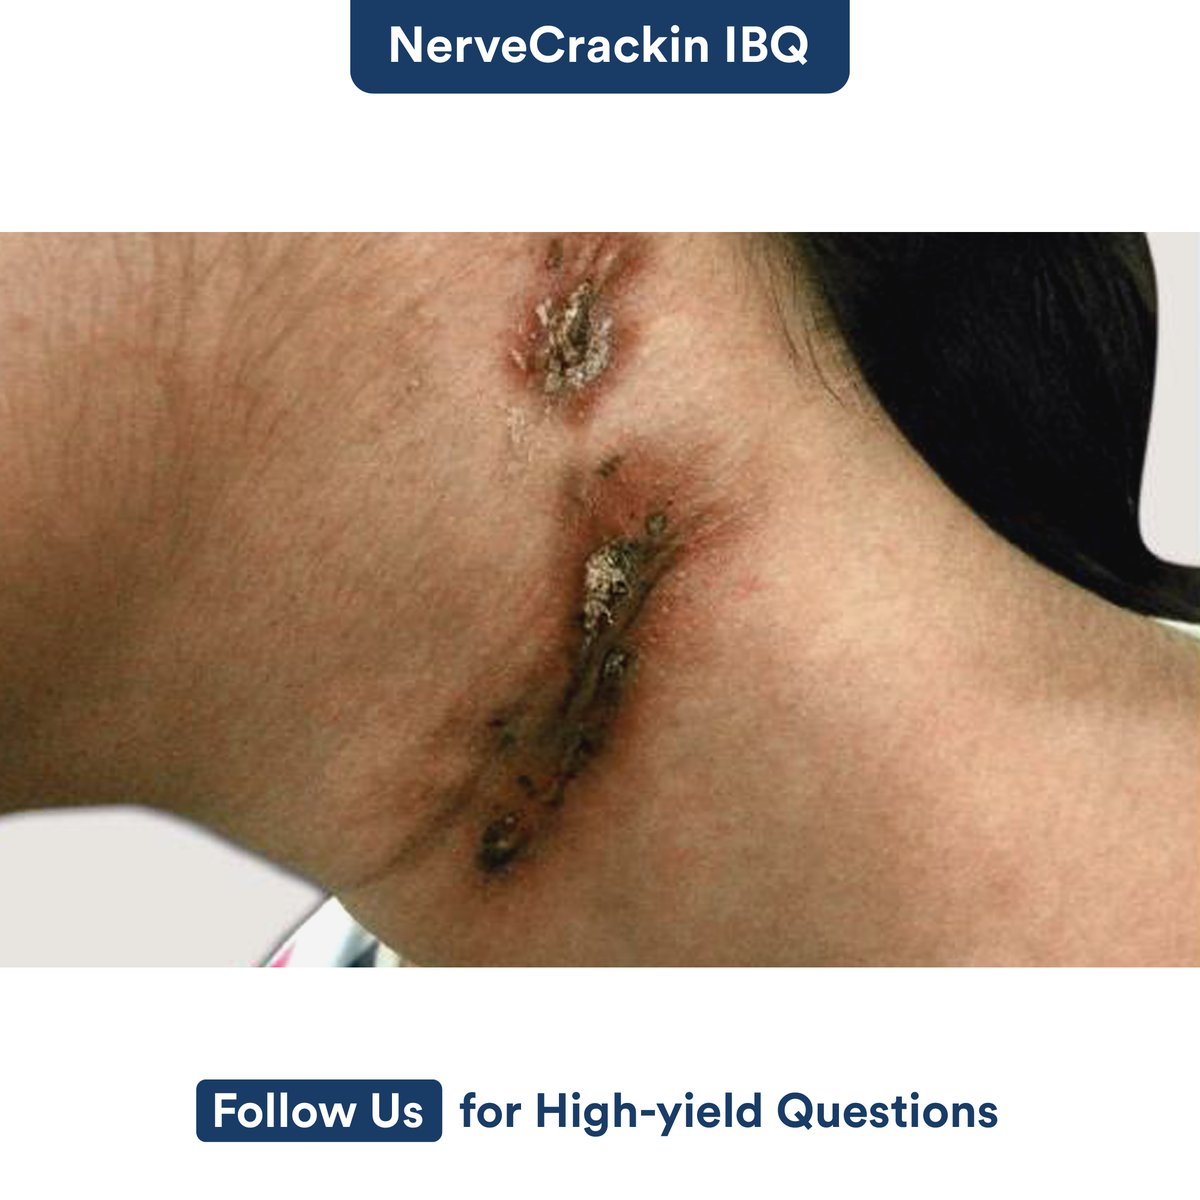 Which disease has been shown in this image? What is the most likely diagnosis?
 
A) Pyoderma gangrenosum  
B) Scrofuloderma  
C) Erysipelas  
D) Impetigo
 
#DigiNerve #IBQ #NerveCrackin #Impetigo #KnowledgeTest #ImageBasedQuestion #Pyoderma #gangrenosum #Erysipelas